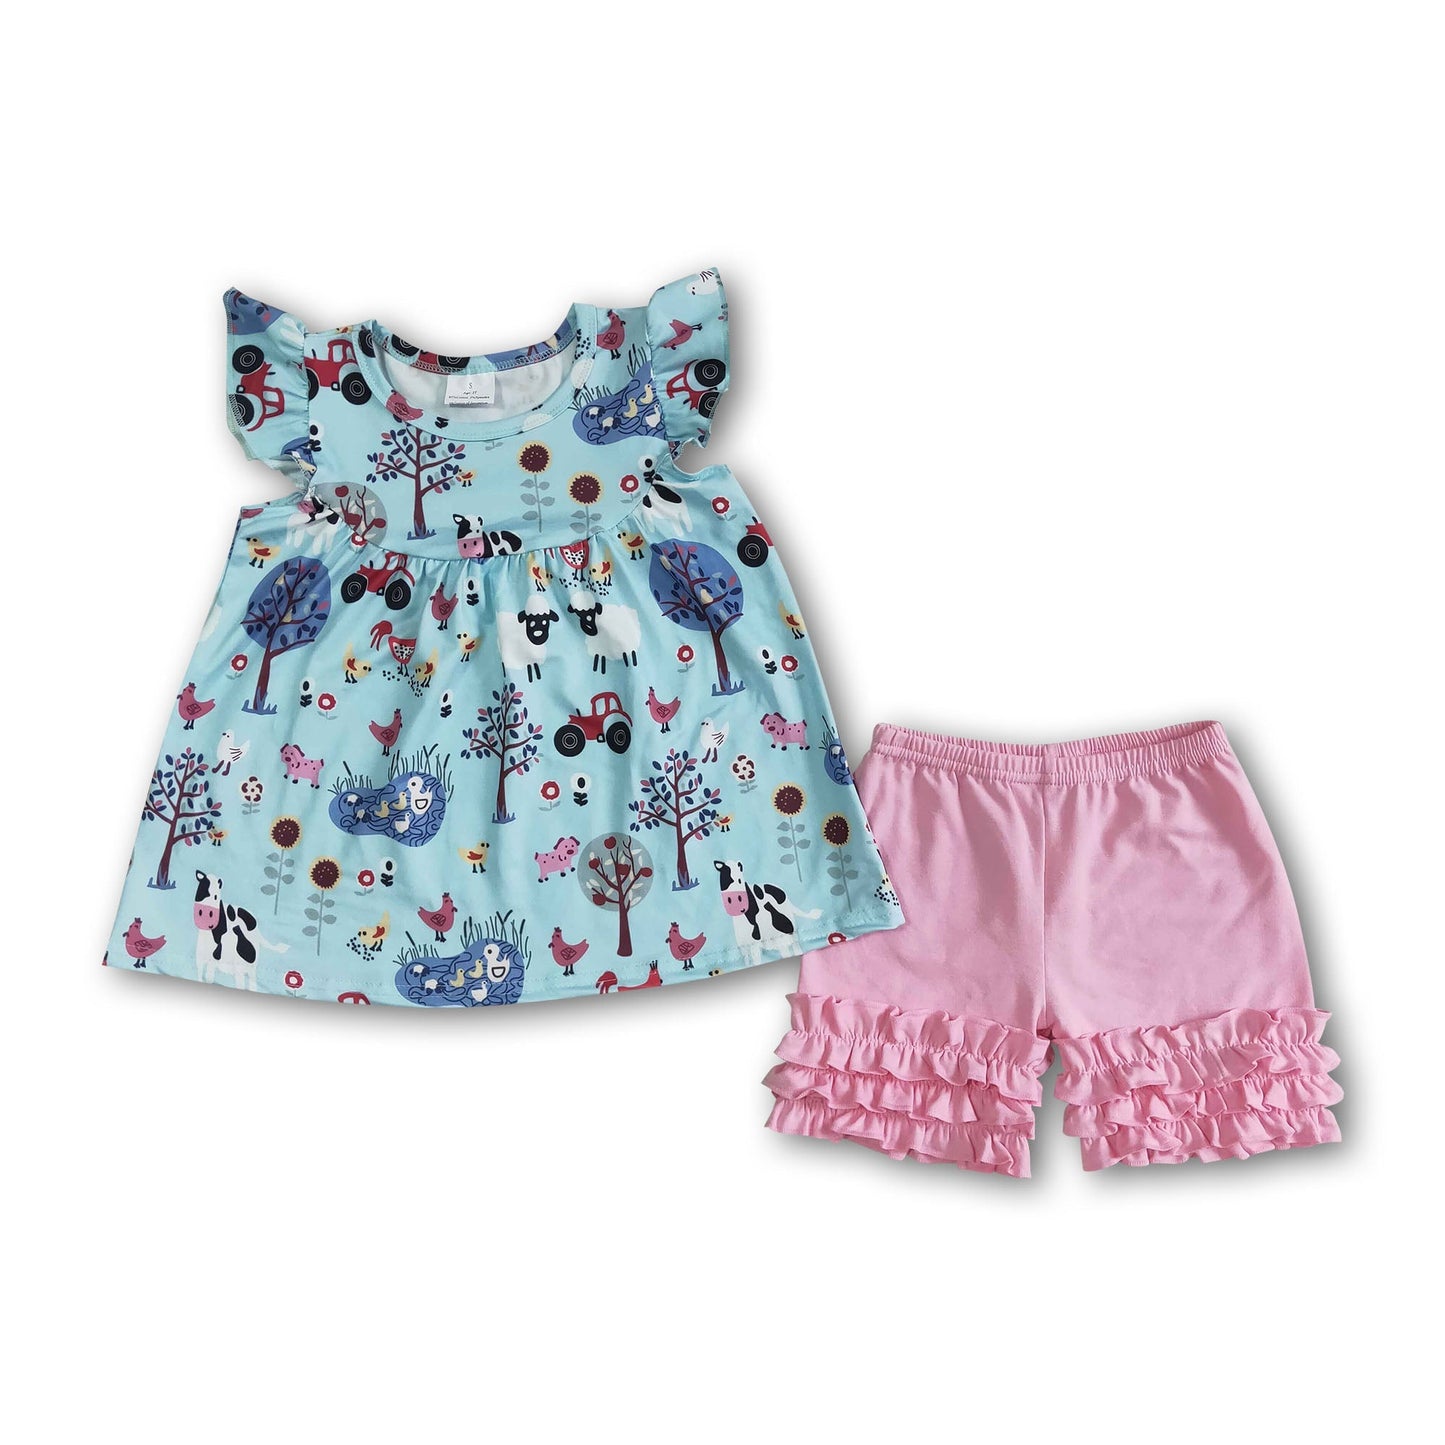 Flutter sleeve farm top pink icing ruffle shorts girls outfits